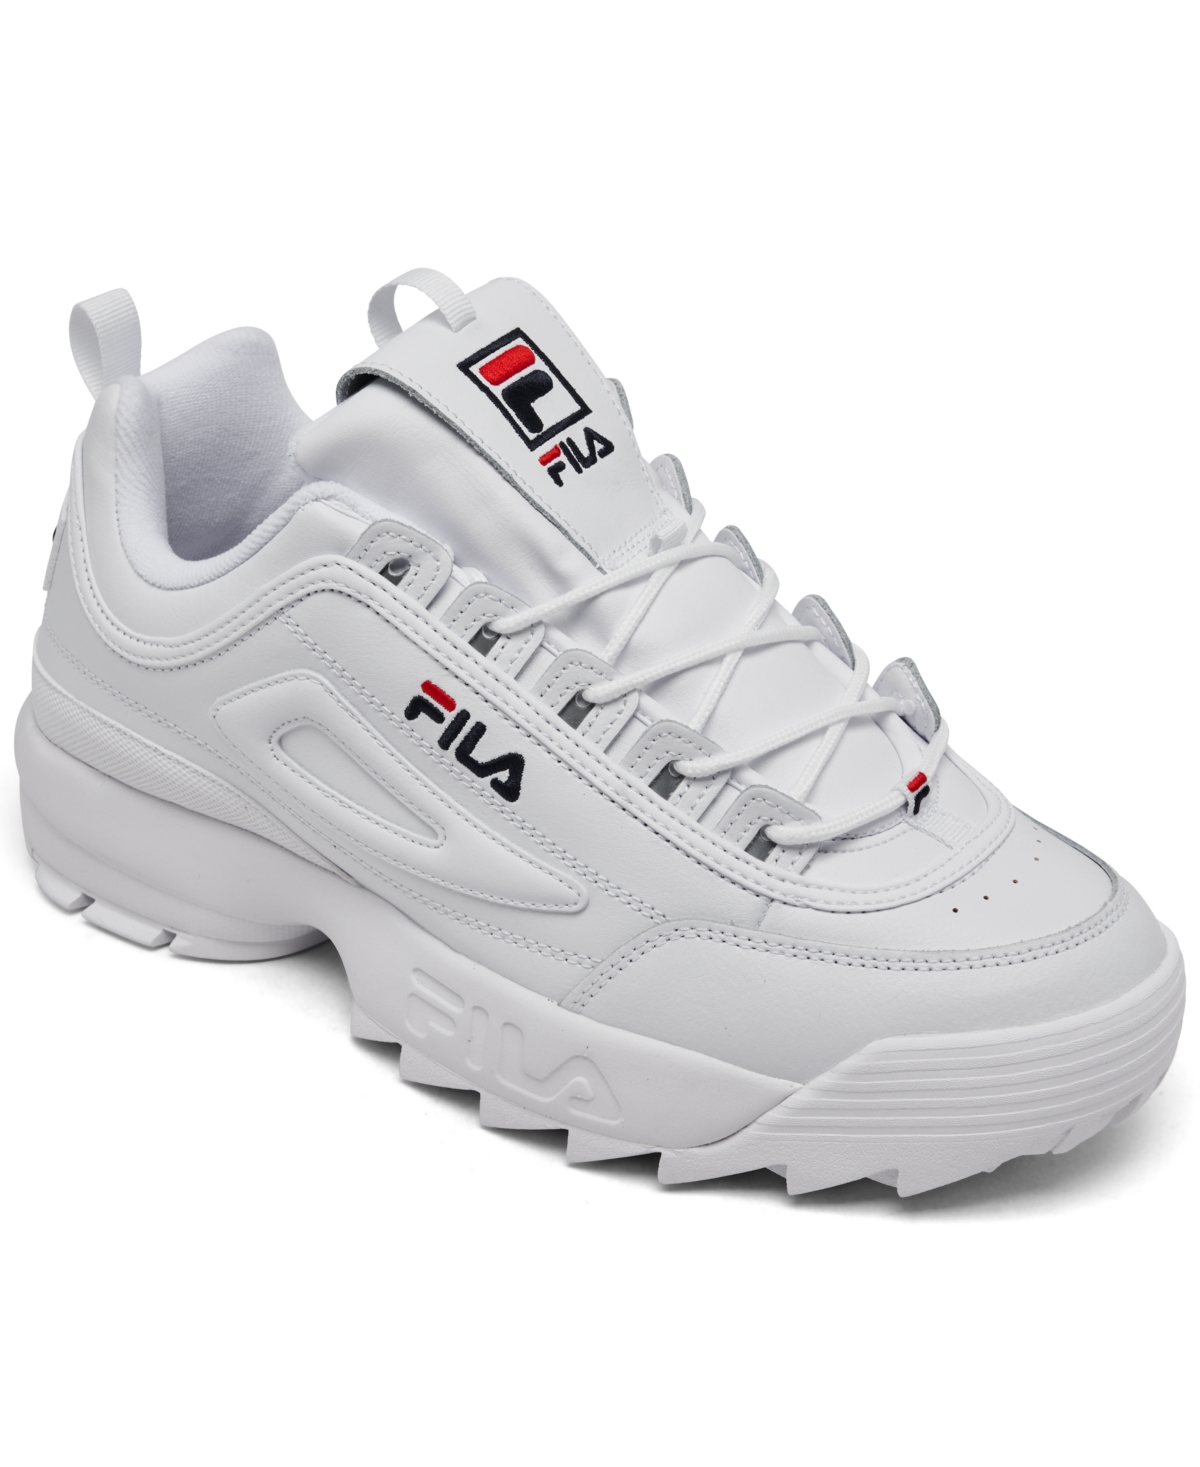 Men's Disruptor Ii Casual Athletic Sneakers from Finish Line - WHITE/FILA NAVY/FILA RED